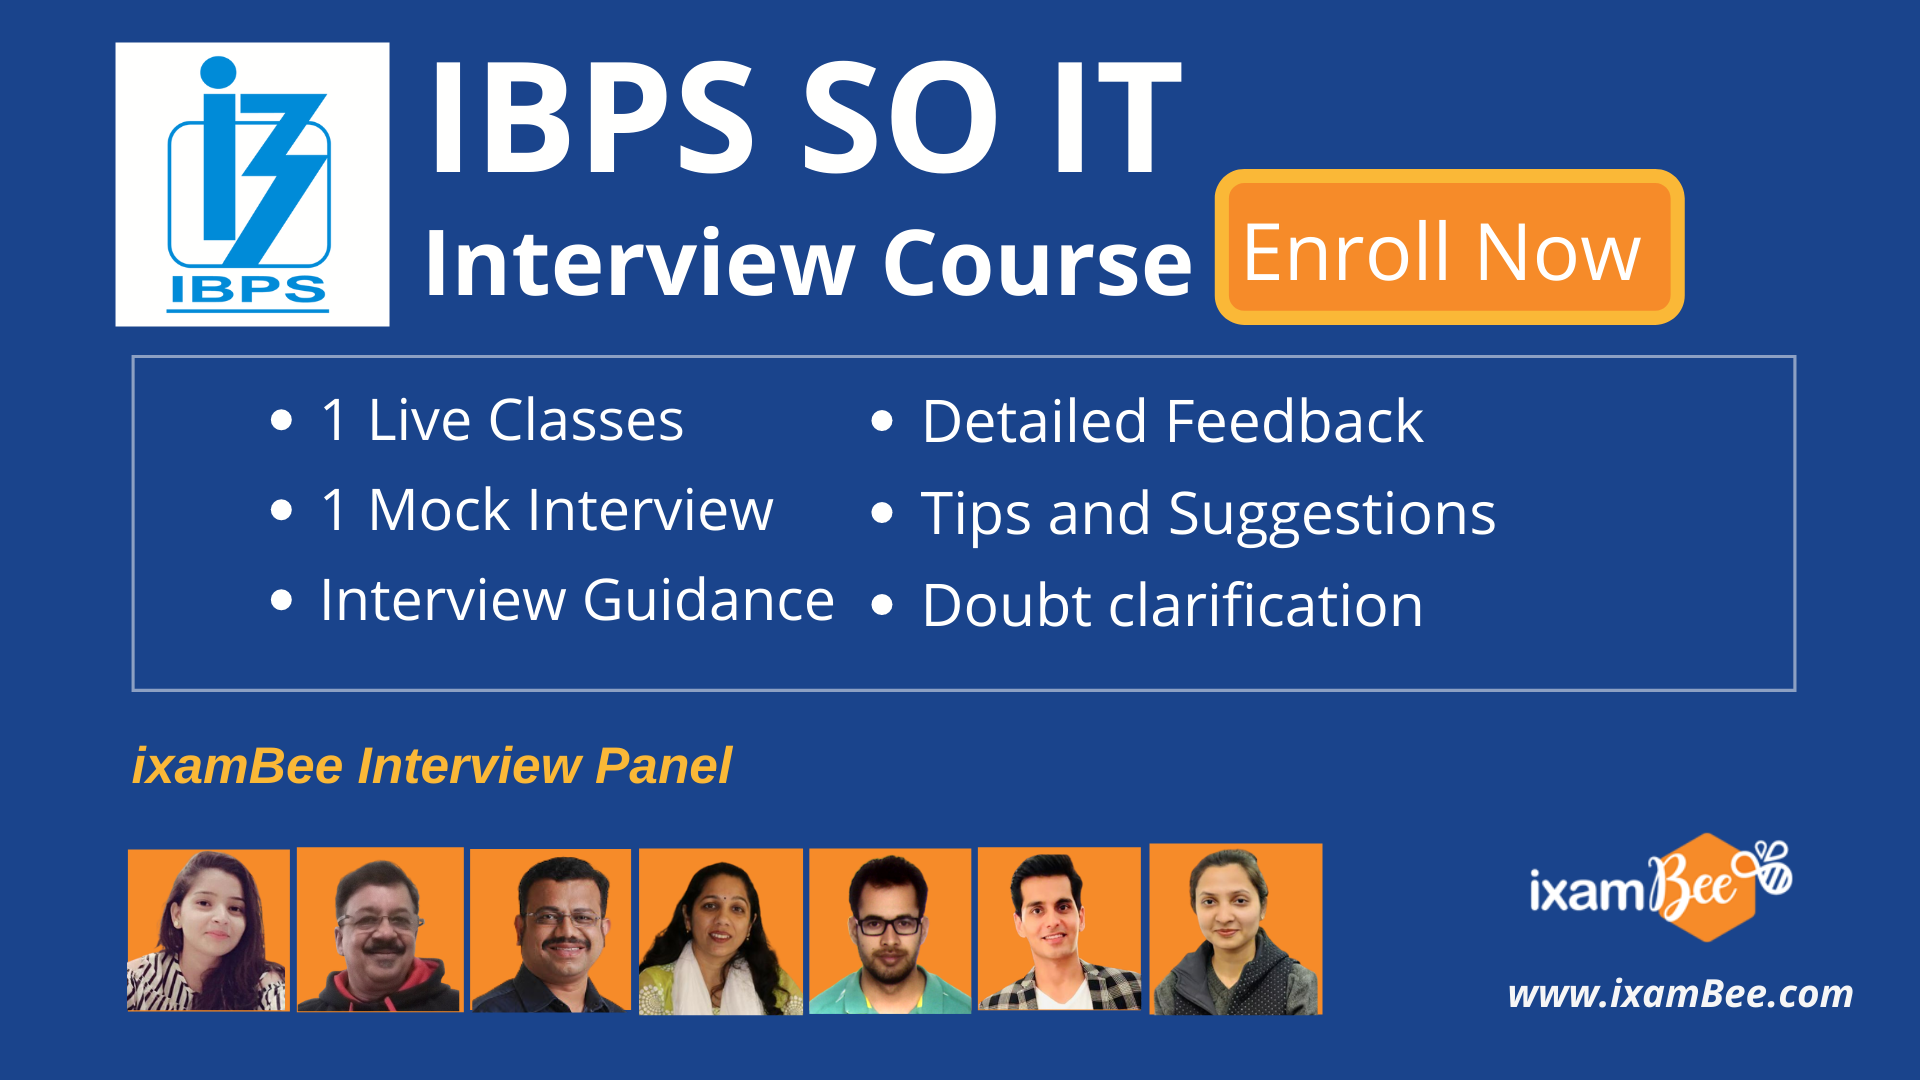 IBPS SO IT Interview Guidance